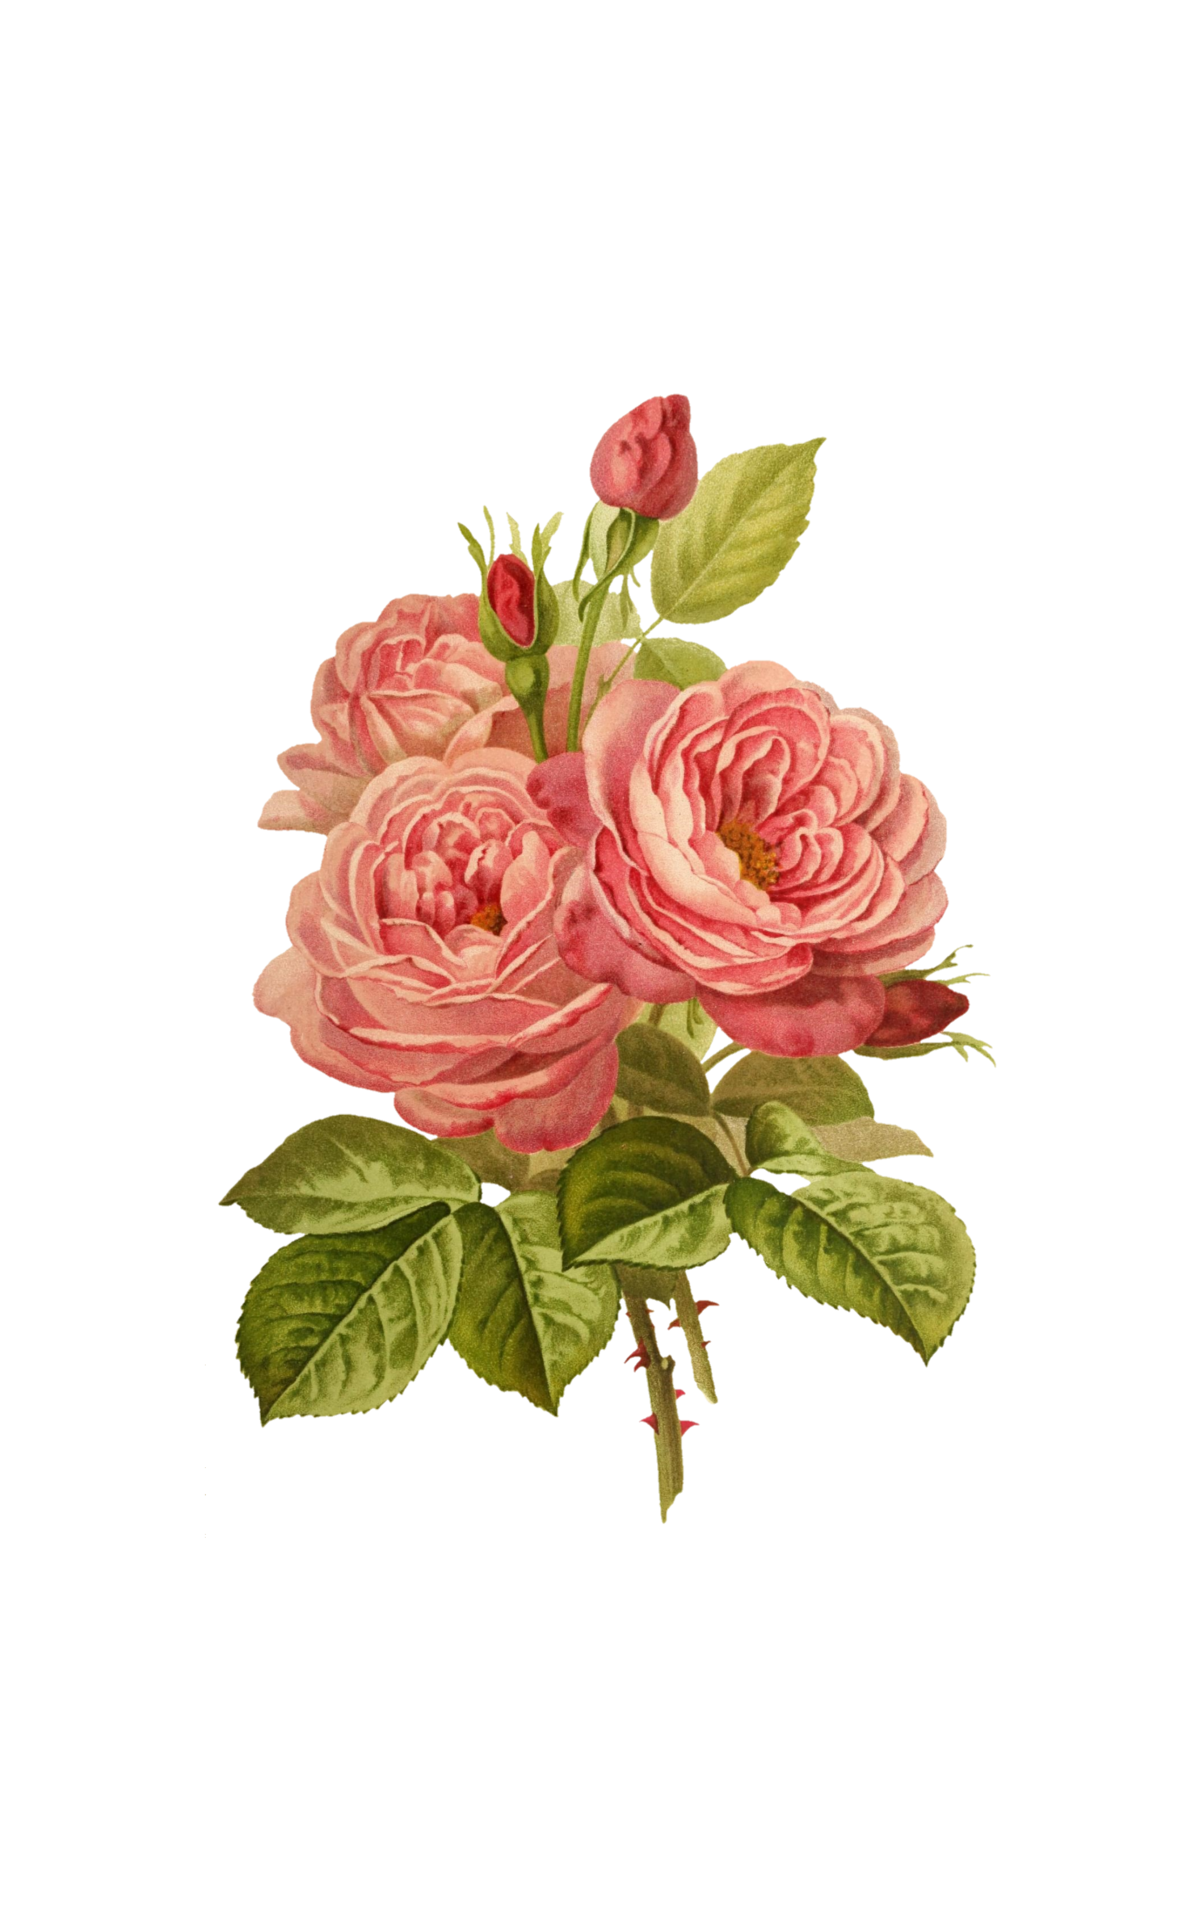 Vintage Clipart Flowers Roses Free Stock Photo - Public Domain Pictures